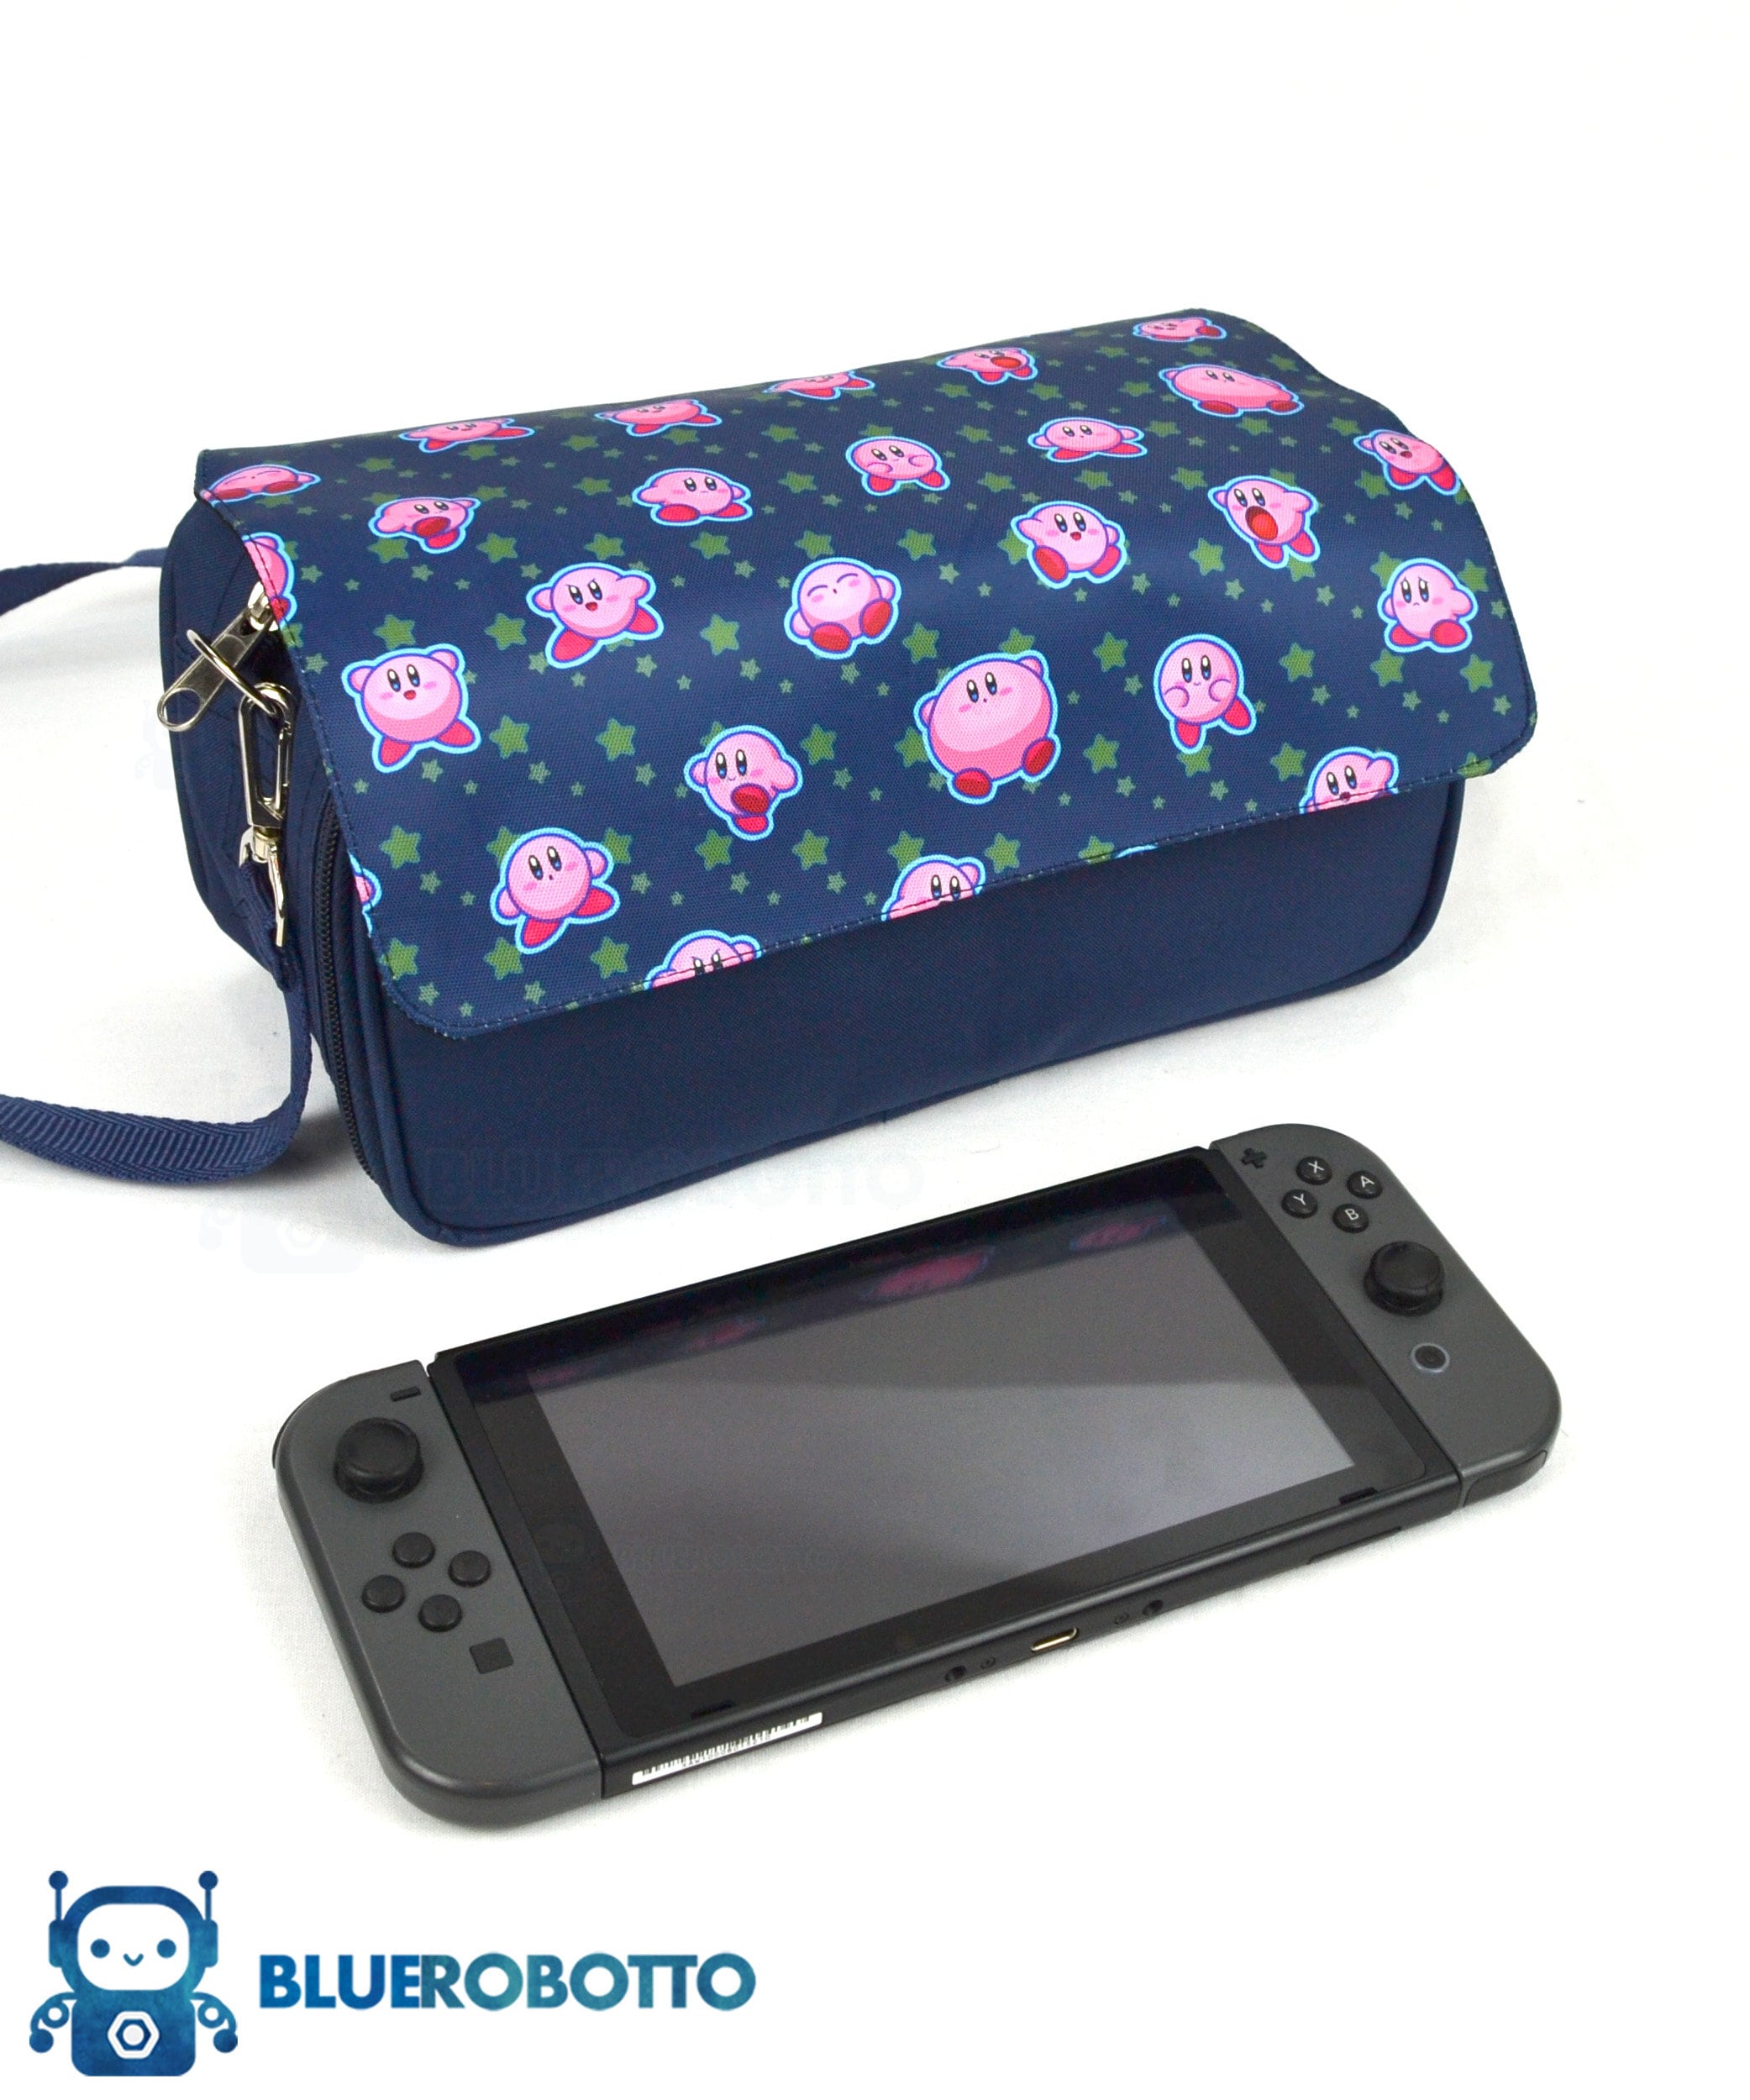 Hades – Nintendo Switch and accessories bag – Blue Robotto